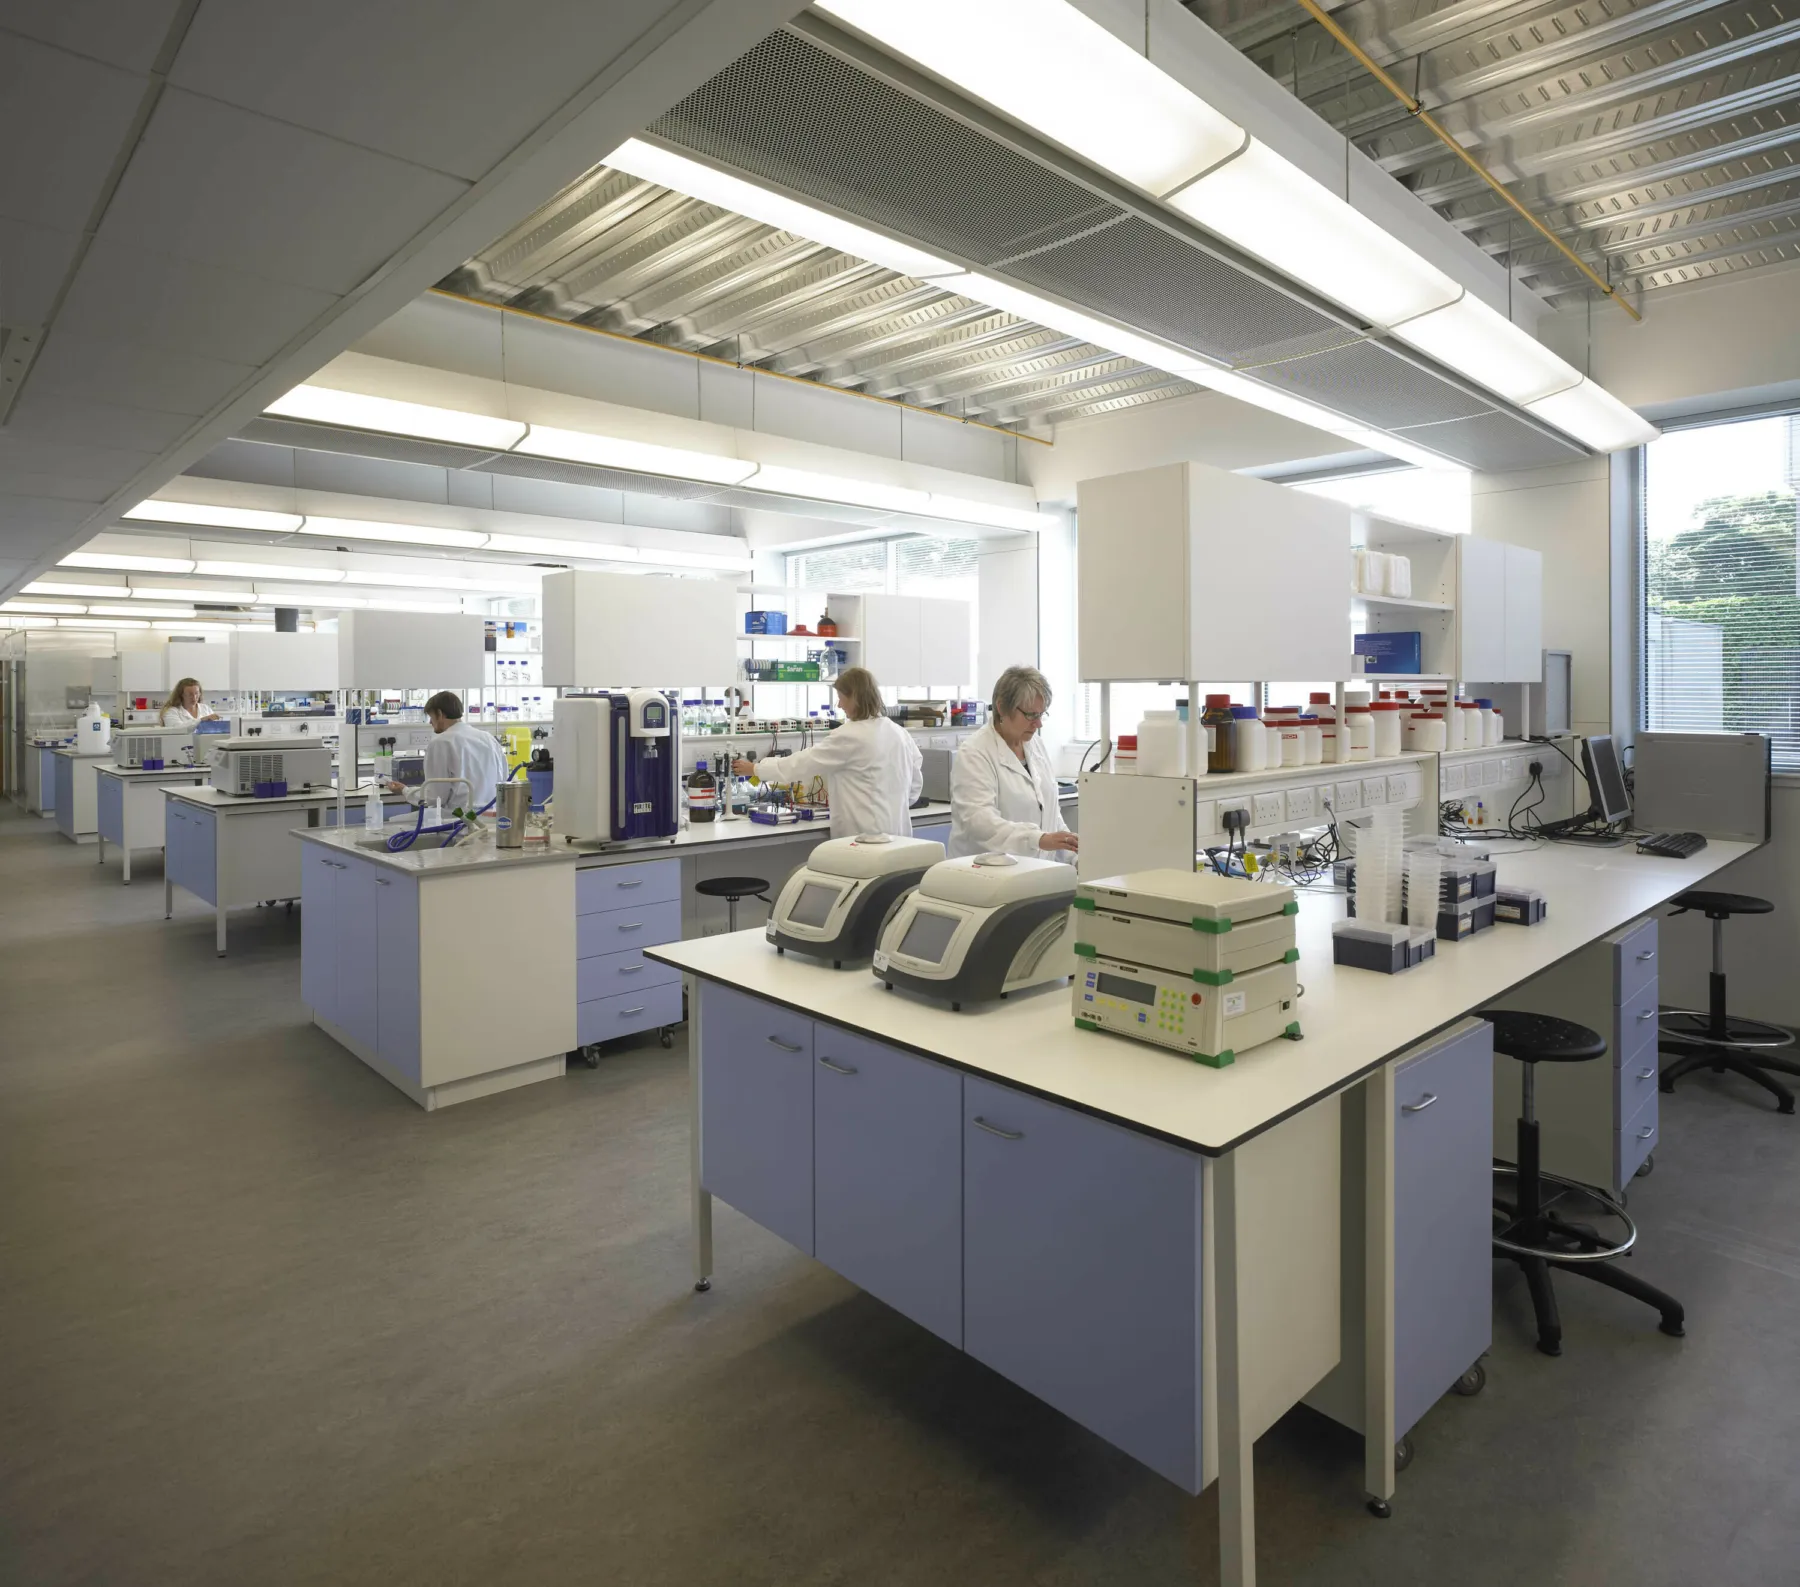 In a lab at the Wadding Building, University of Edinburgh. A purpose built laboratory space, with benches and units to create workspace for scientists and researchers. Large windows enhance the lighting.